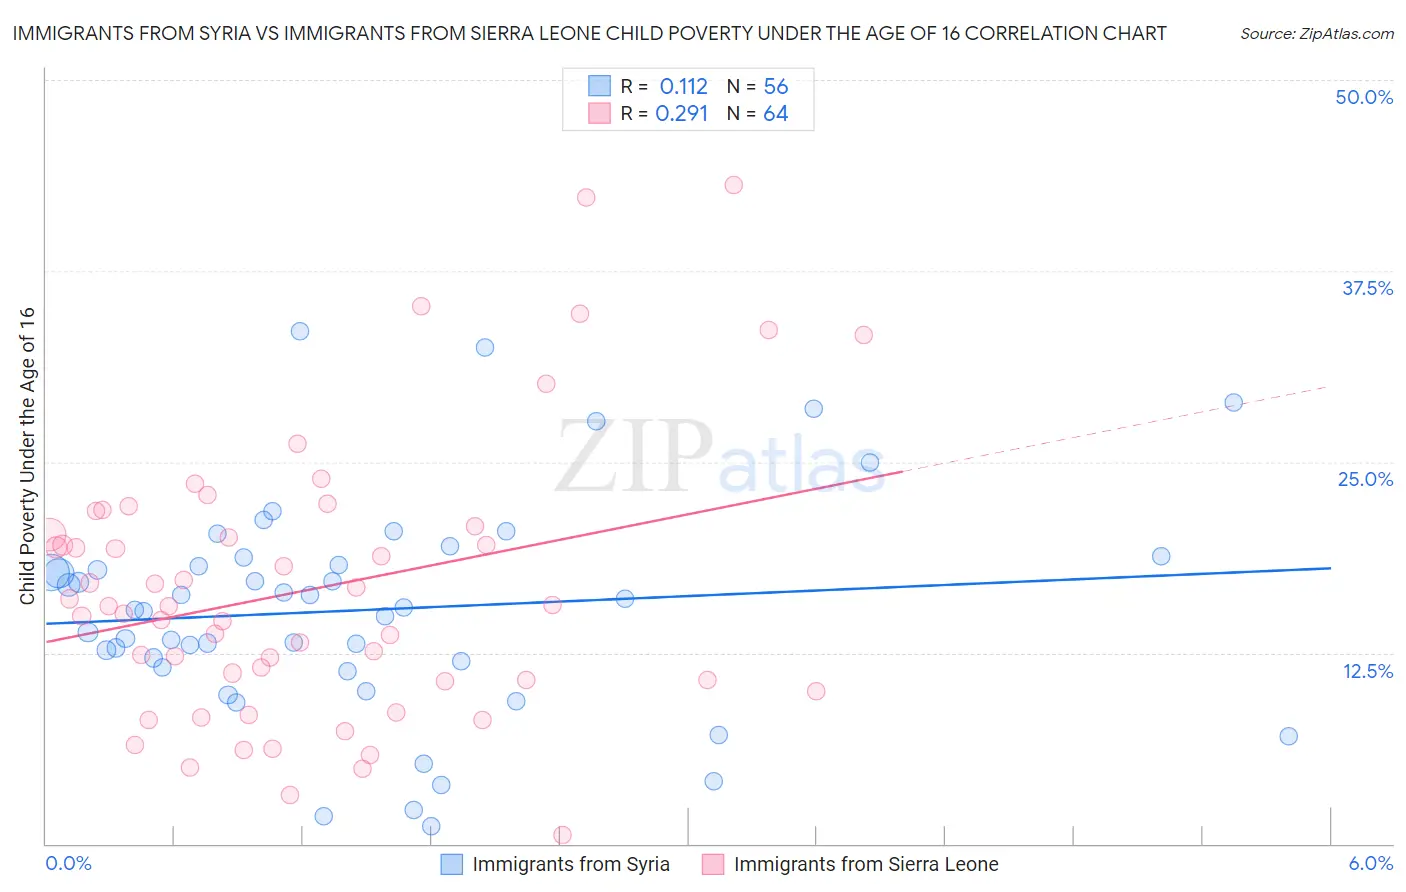 Immigrants from Syria vs Immigrants from Sierra Leone Child Poverty Under the Age of 16